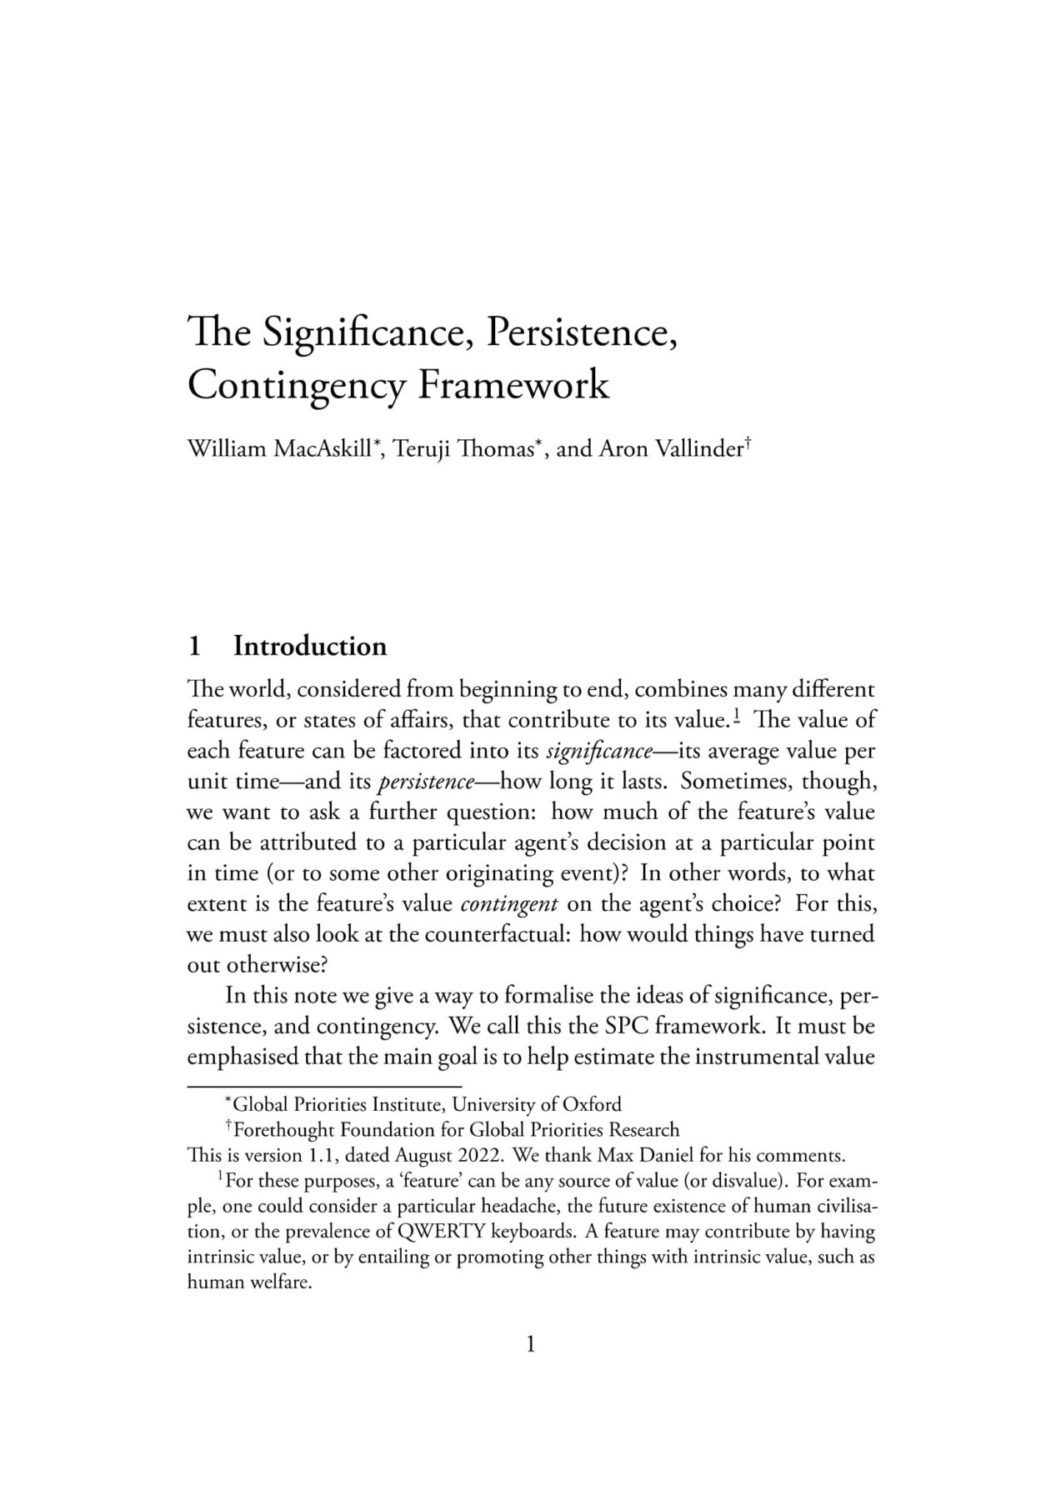 Image - William MacAskill, Teruji Thomas, and Aron Vallinder - The Significance, Persistence, Contingency Framework-1